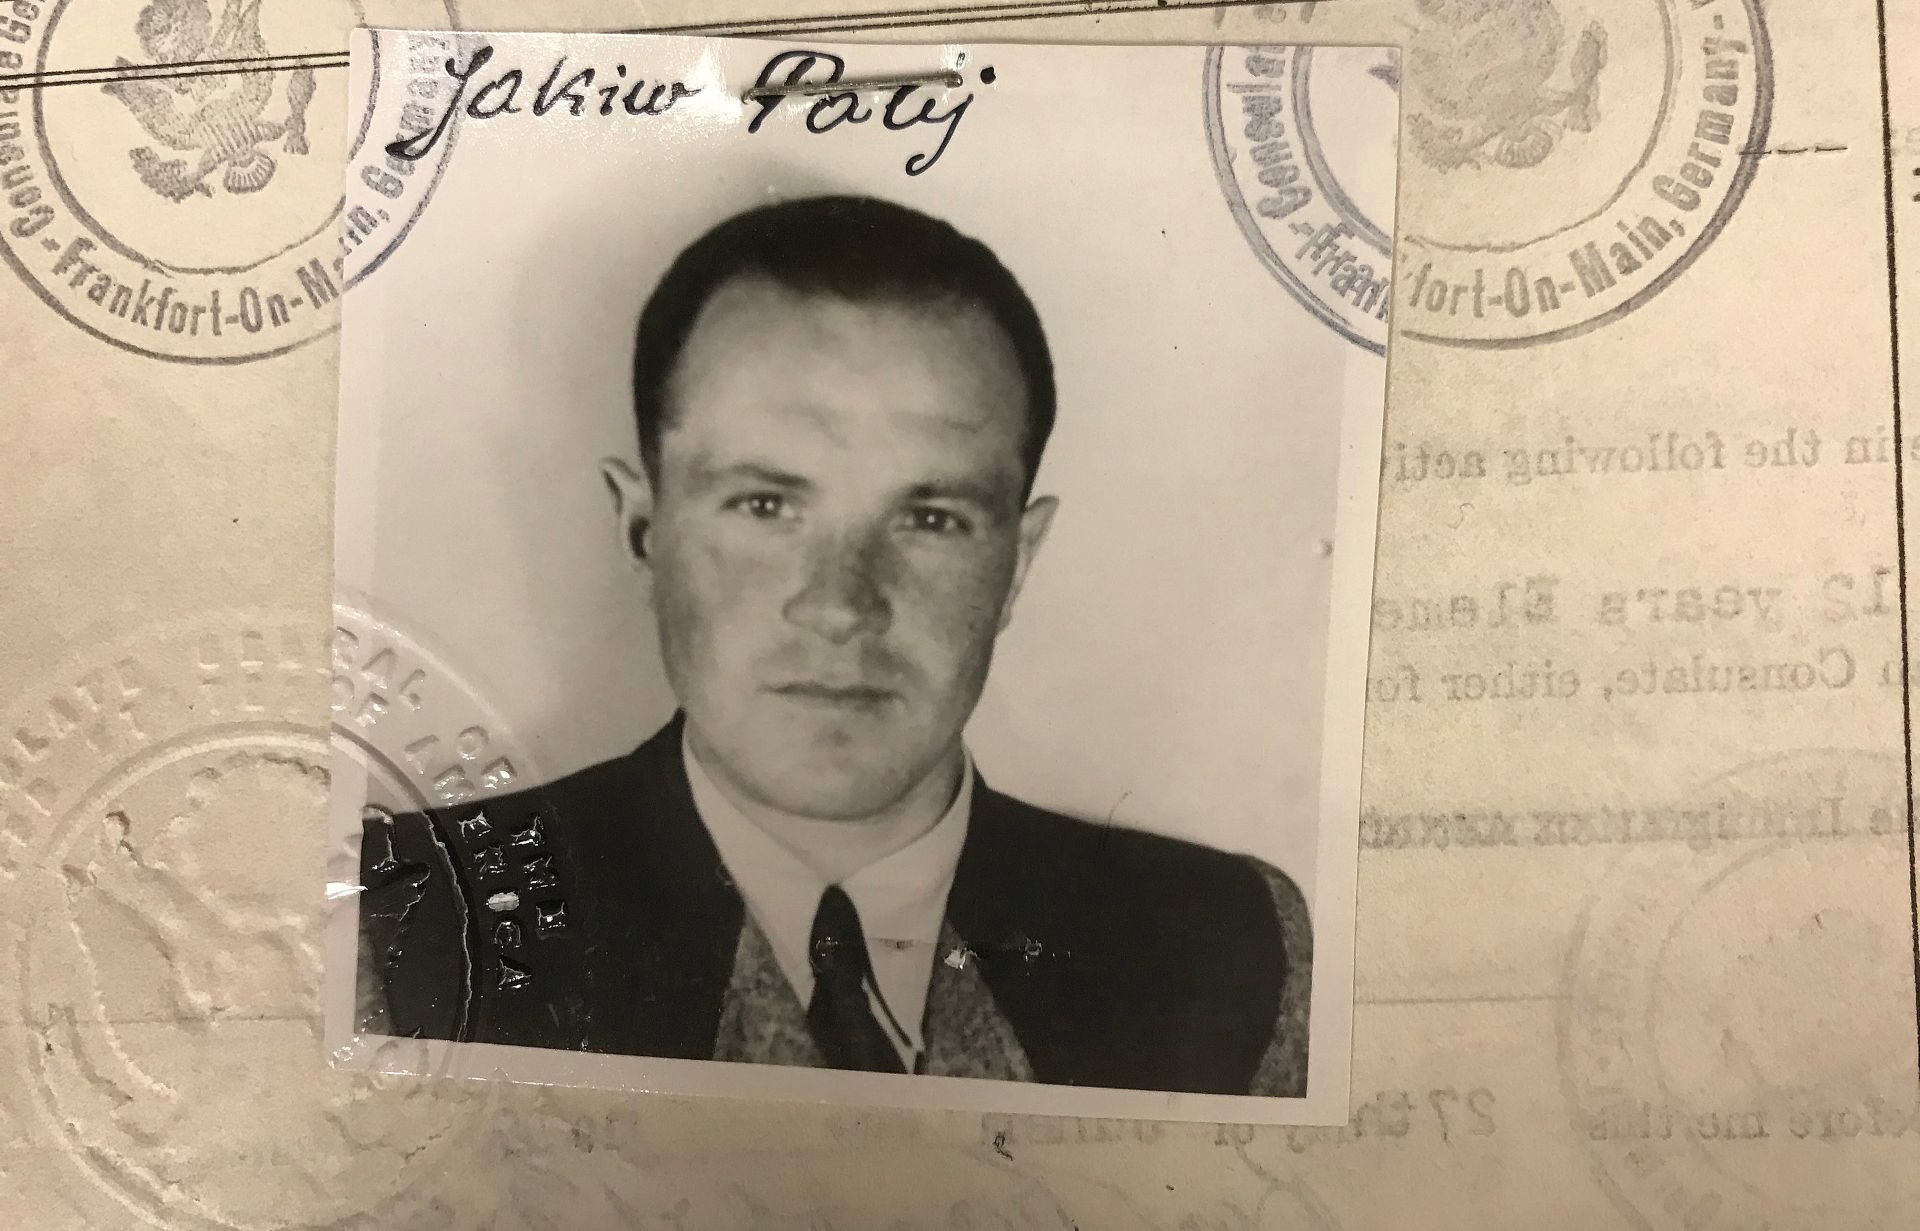 epa07274036 (FILE) - A handout photo made available by the US Department of Justice shows the 1949 US visa of former Nazi concentration camp guard Jakiw Palij, issued 22 August 2018, (reissued 10 January 2019). According to media reports, on 10 January 2019, Palij, who reportedly served as a guard at Trawniki labor camp in German-occupied Poland from 1943, and was deported from the US to Germany has died  aged 95 in a home for the elderly in the town of Ahlen in Germany.  EPA/US DEPARTMENT OF JUSTICE / HANDOUT  HANDOUT EDITORIAL USE ONLY/NO SALES *** Local Caption *** 54568383